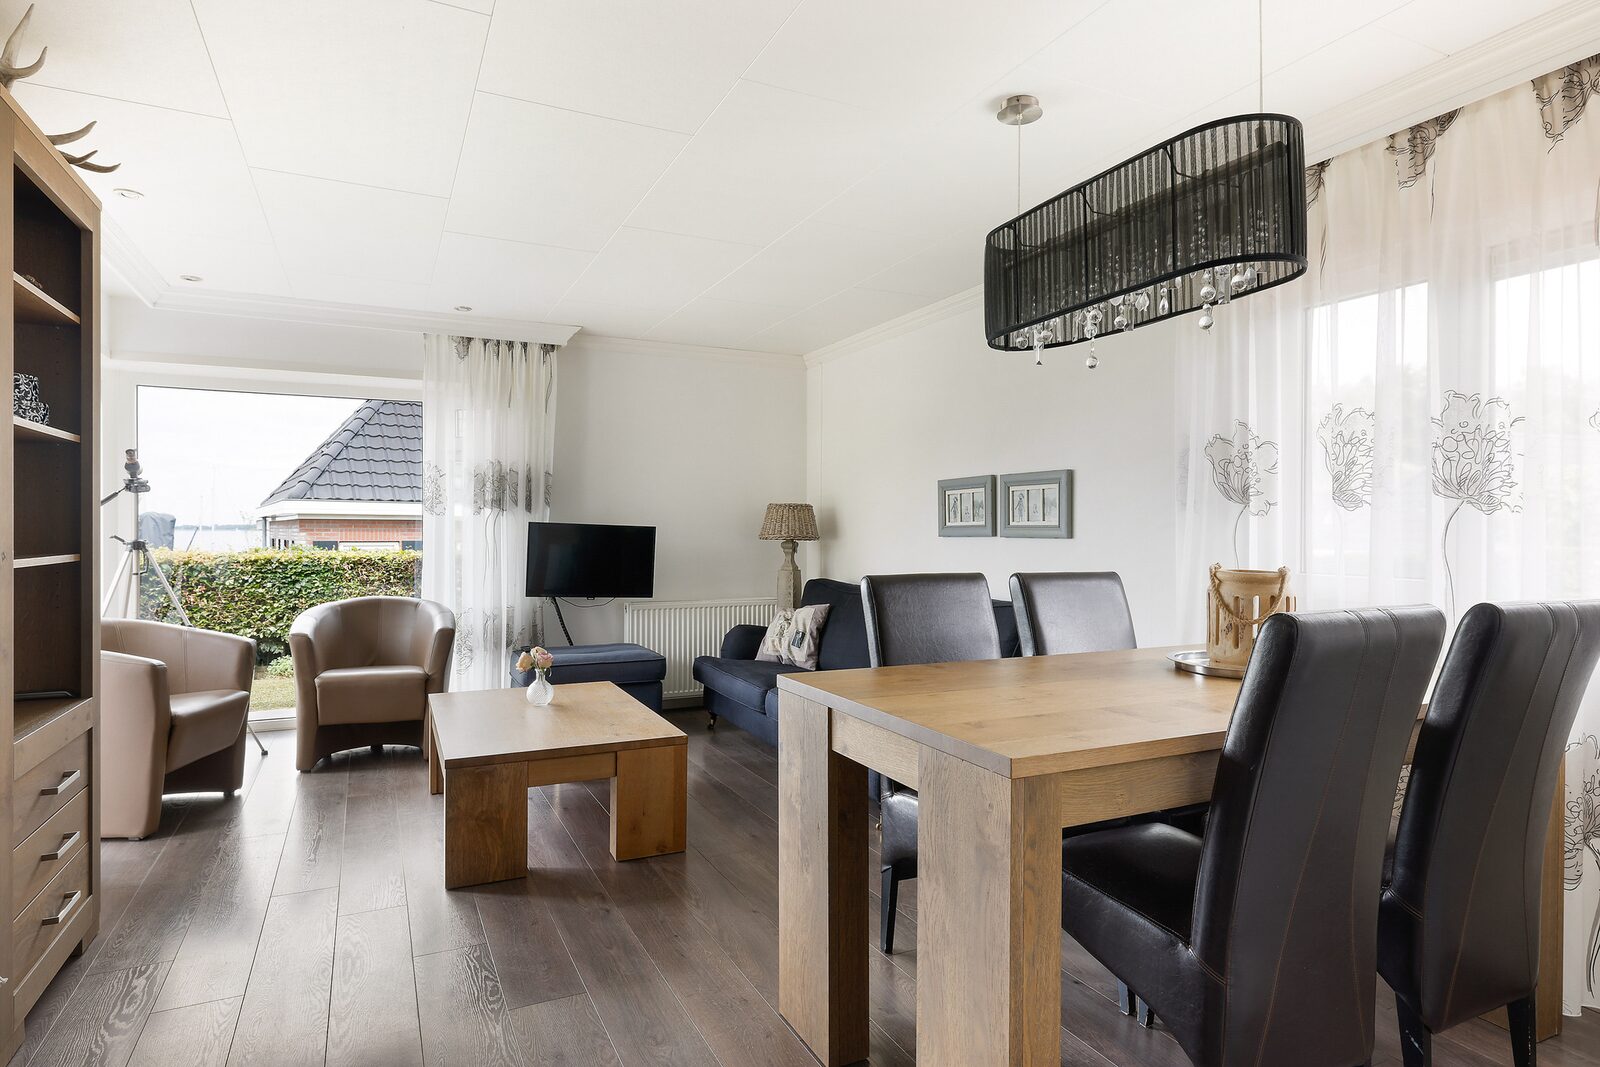 Accommodation for six persons with outdoor sauna & view of the Veluwemeer, three bedrooms